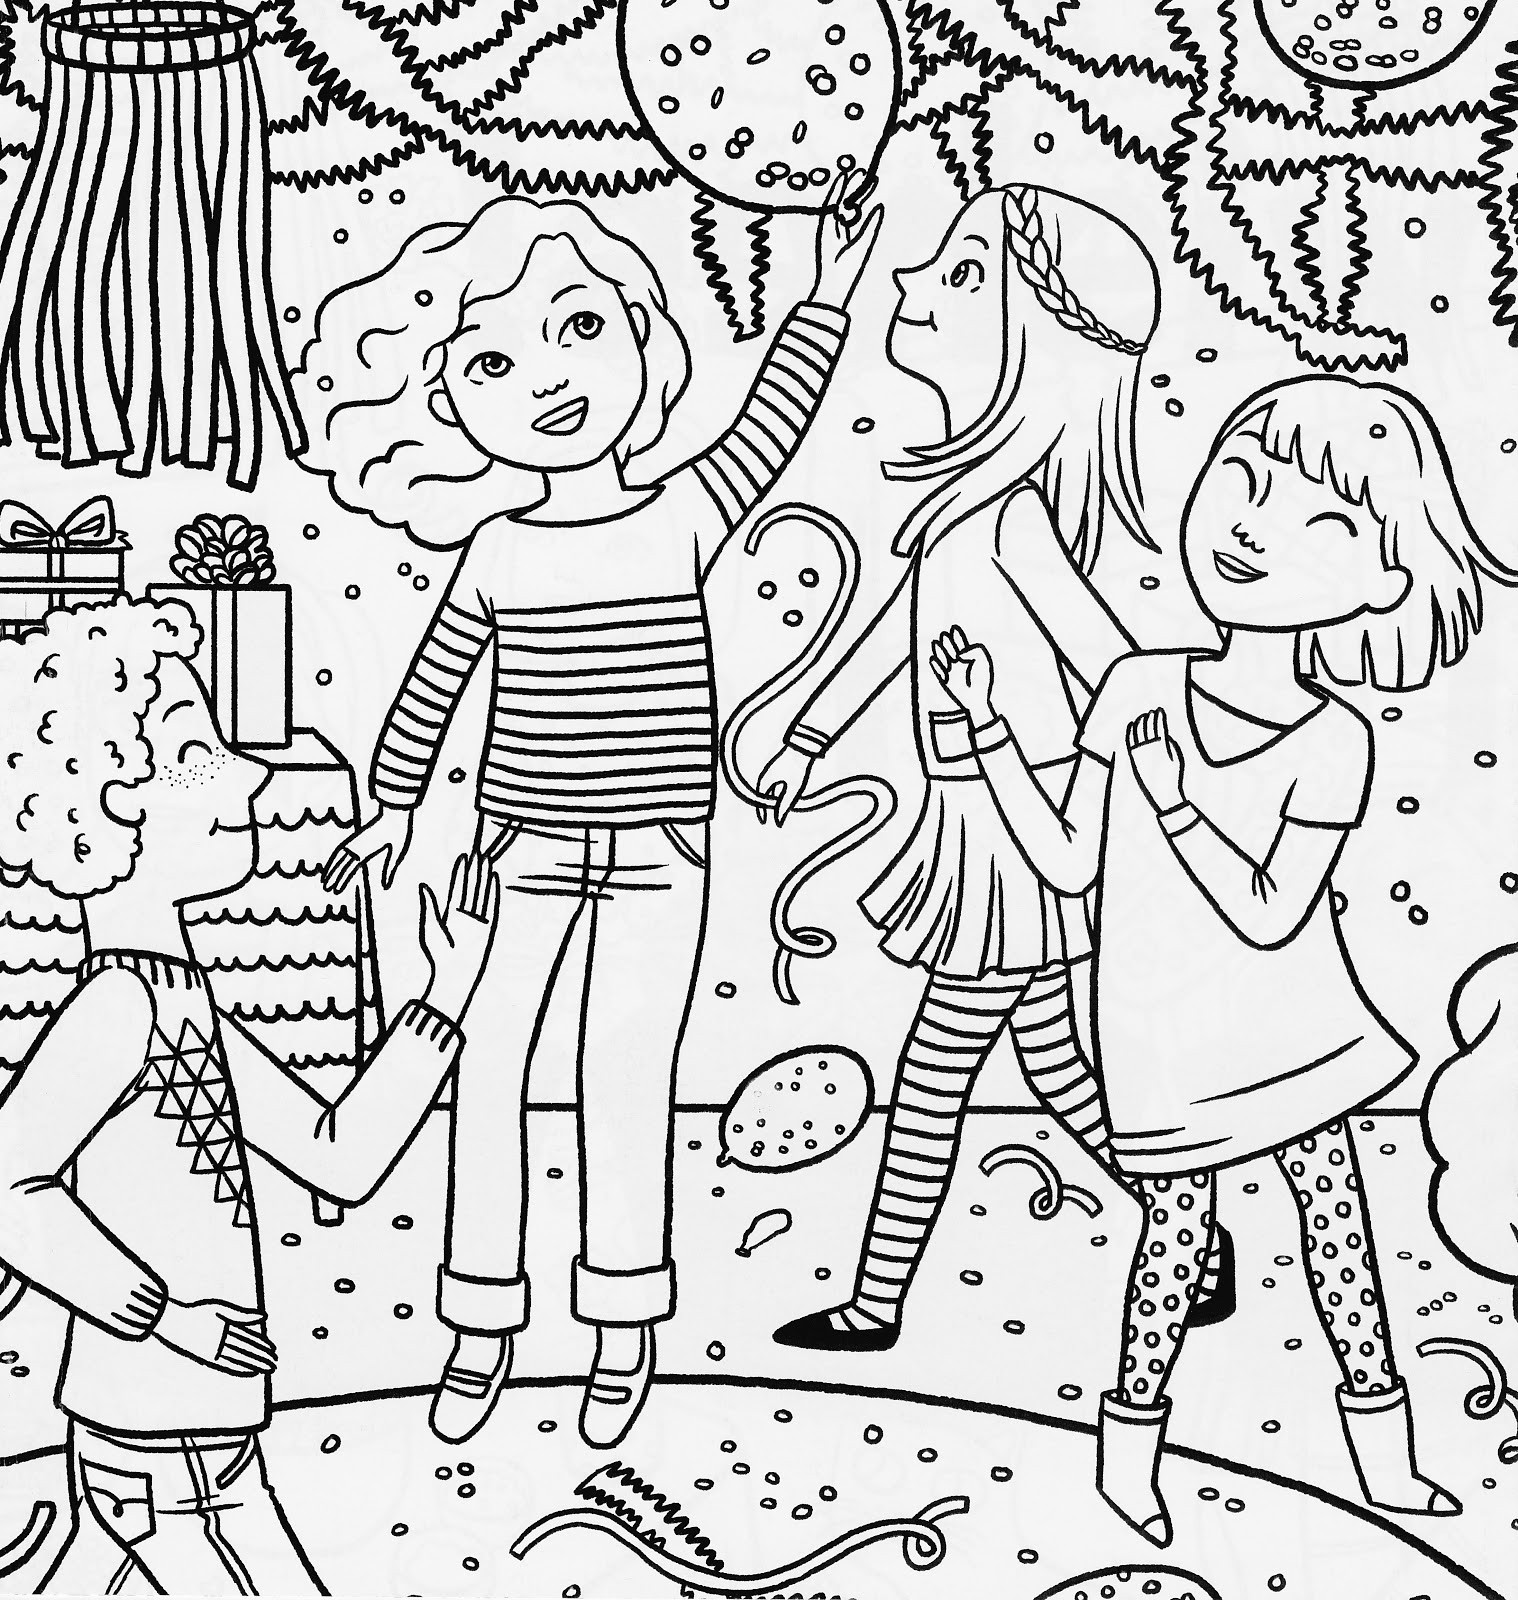 Coloring Pages American Girl
 Bonggamom Finds American Girl Magazine Special Birthday